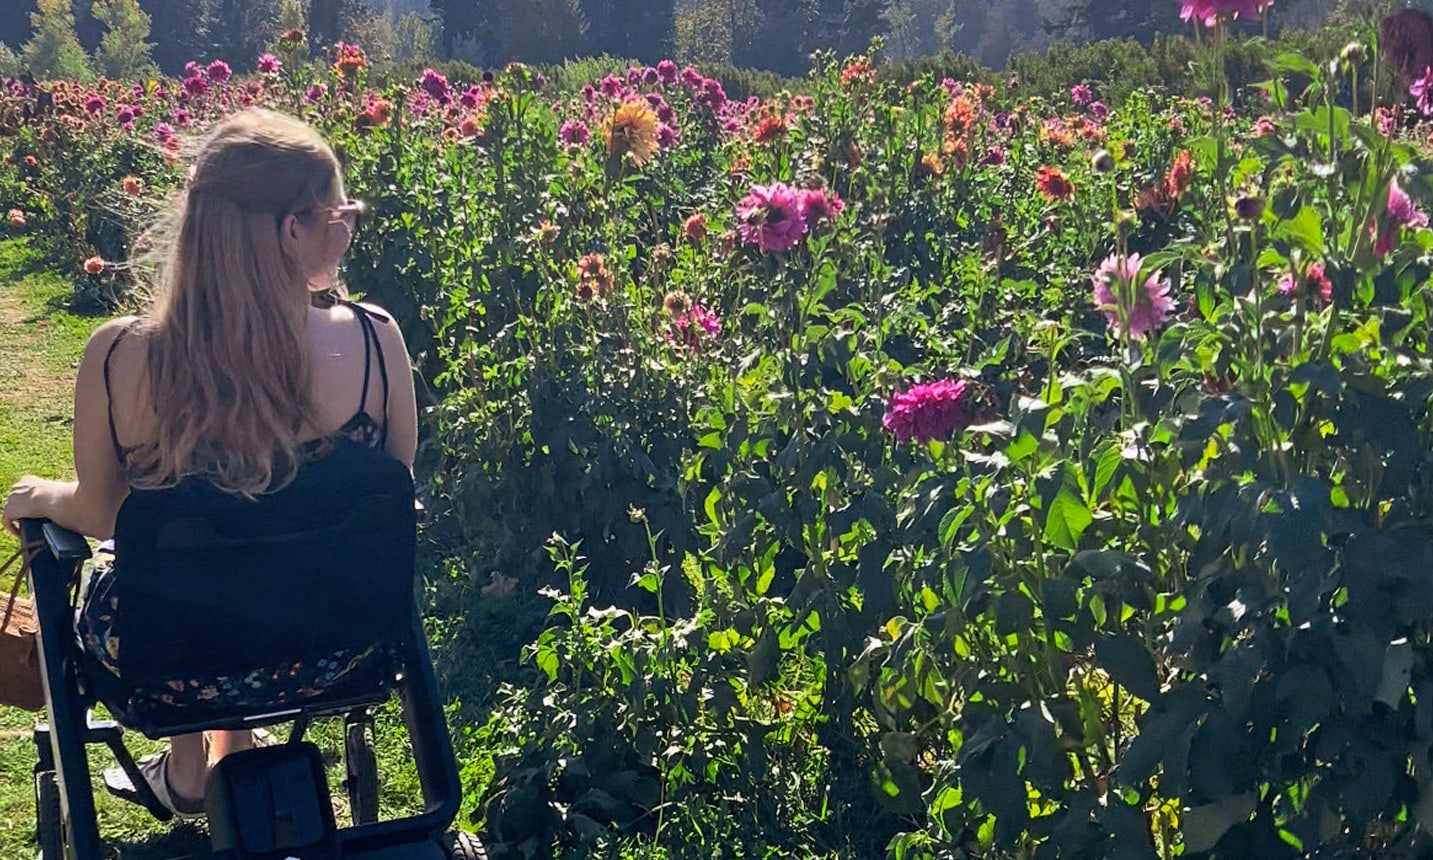 A woman in a wheelchair stops by a field of tall flowers.